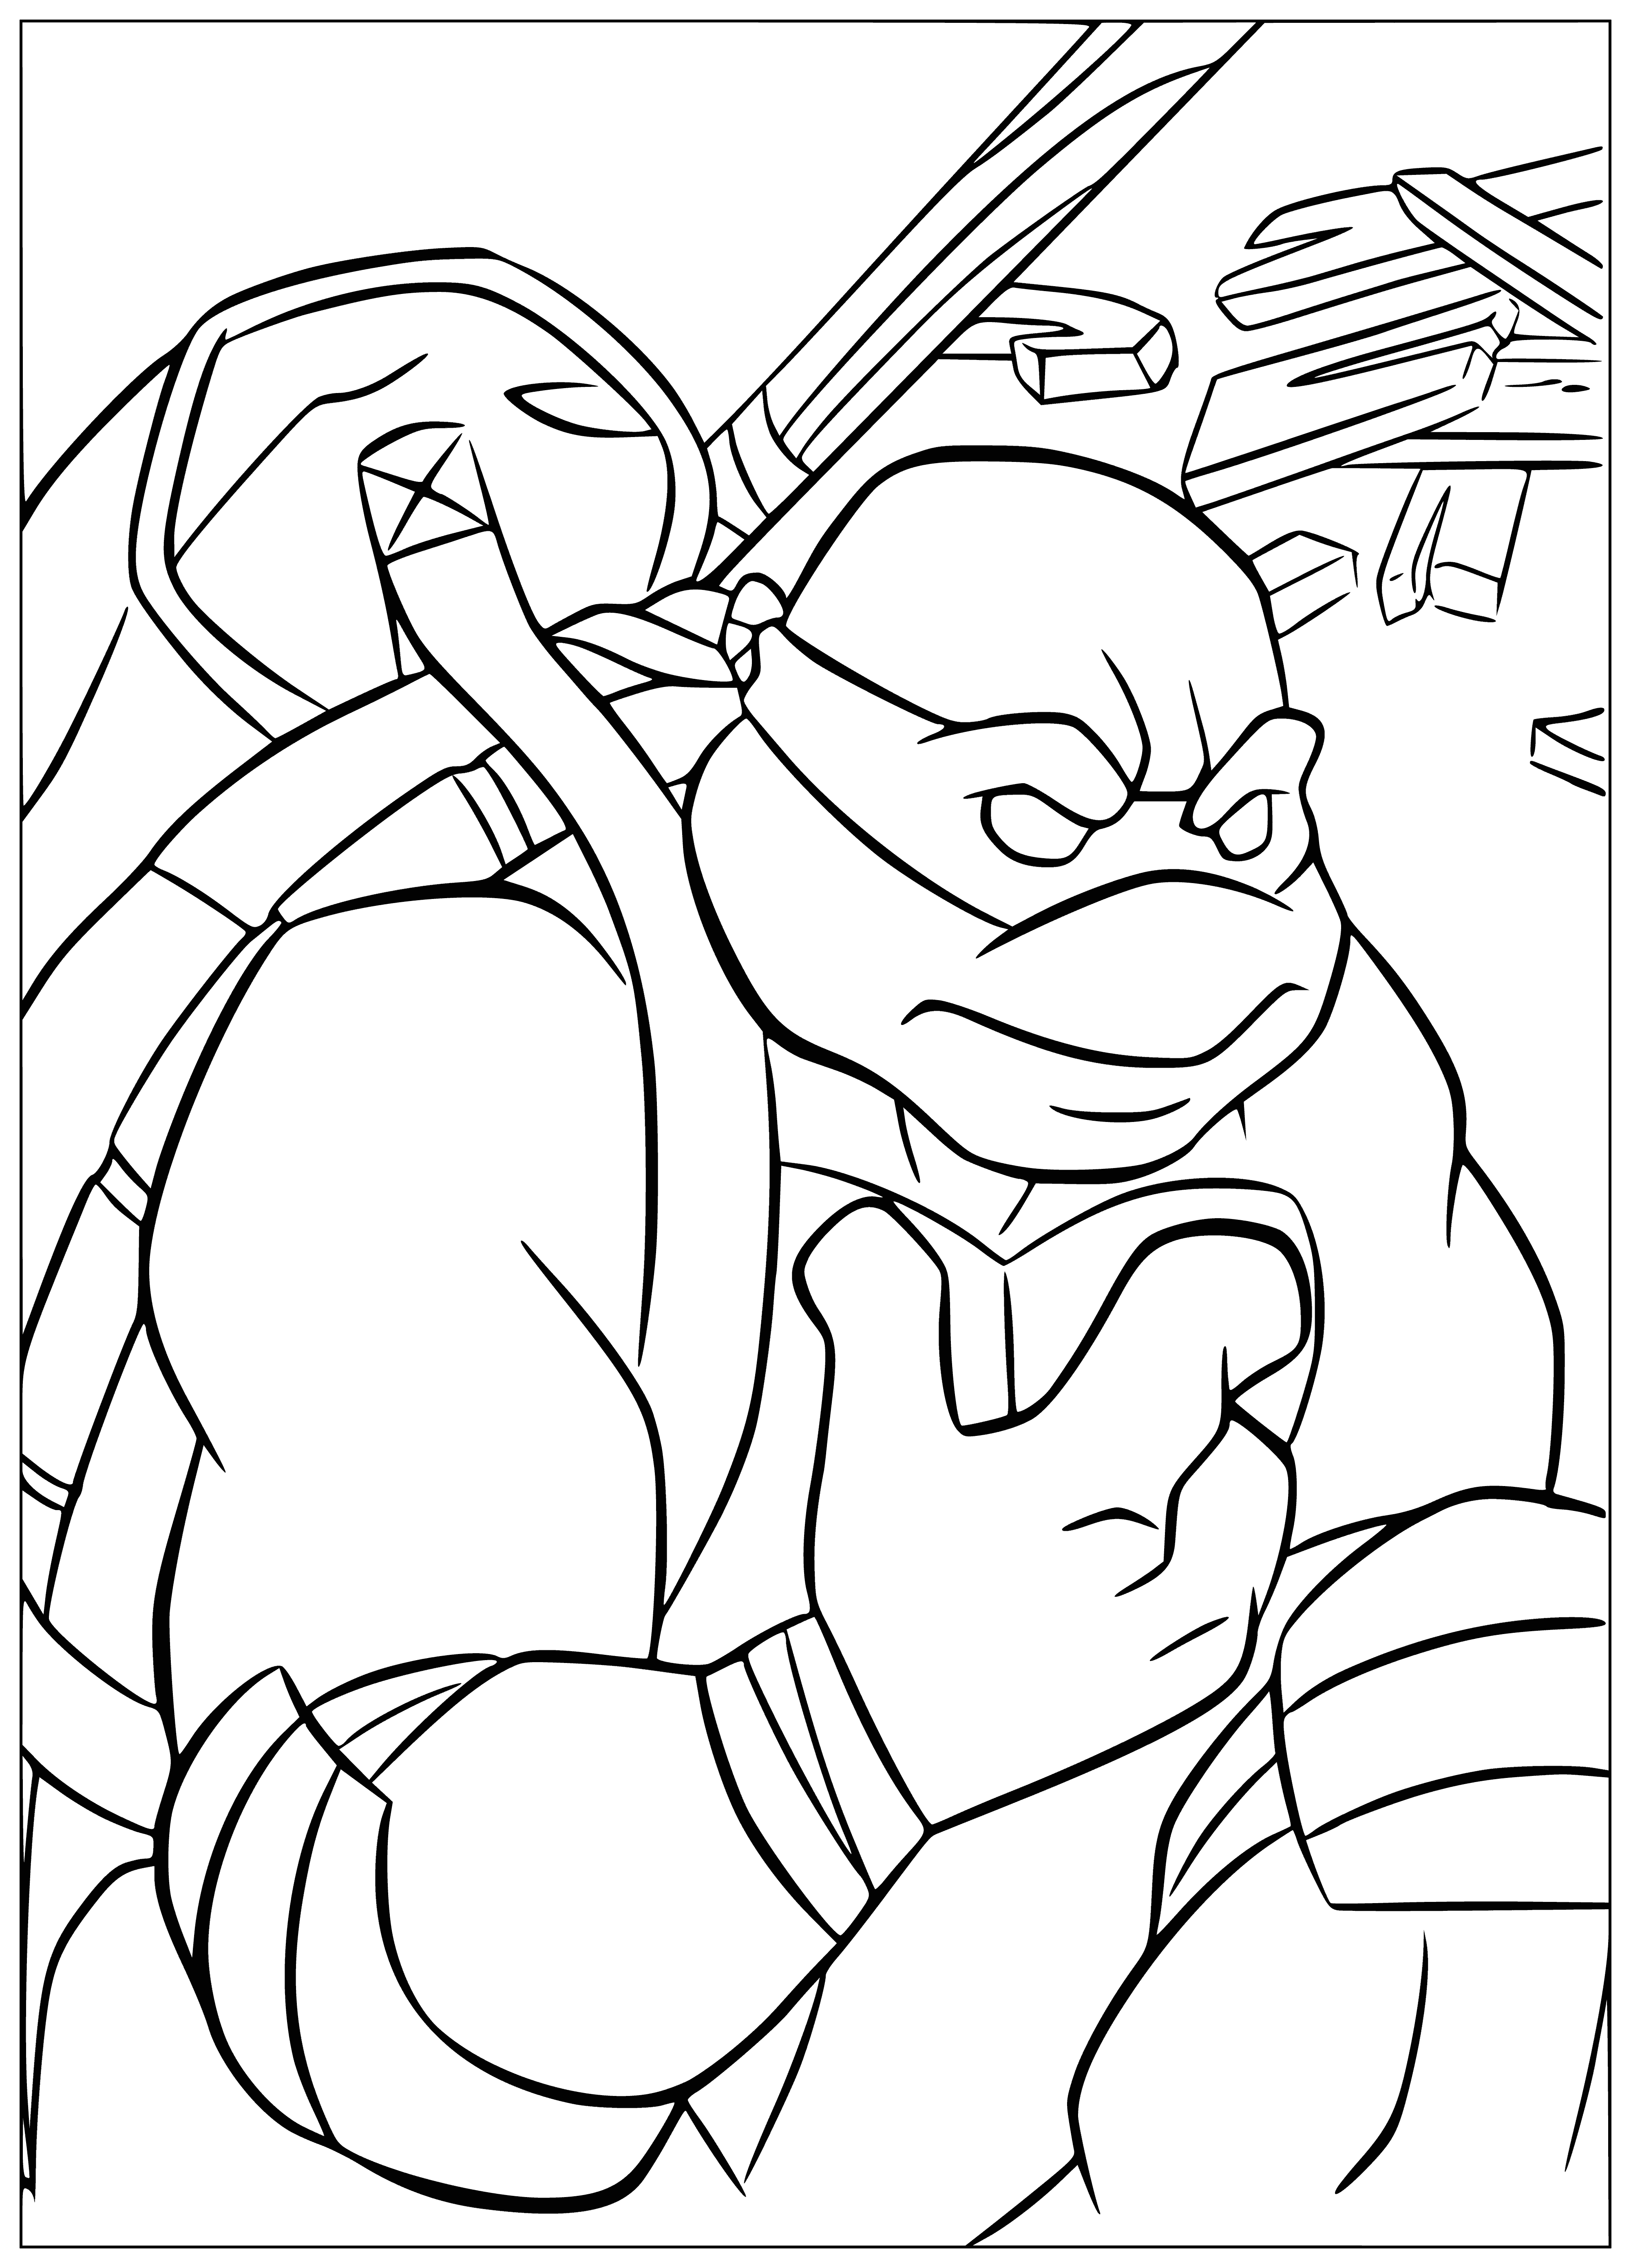 coloring page: Turtle wearing a purple mask and yellow bandana, holding staff and with a shell on back - ready for adventure! #turtle #adventure